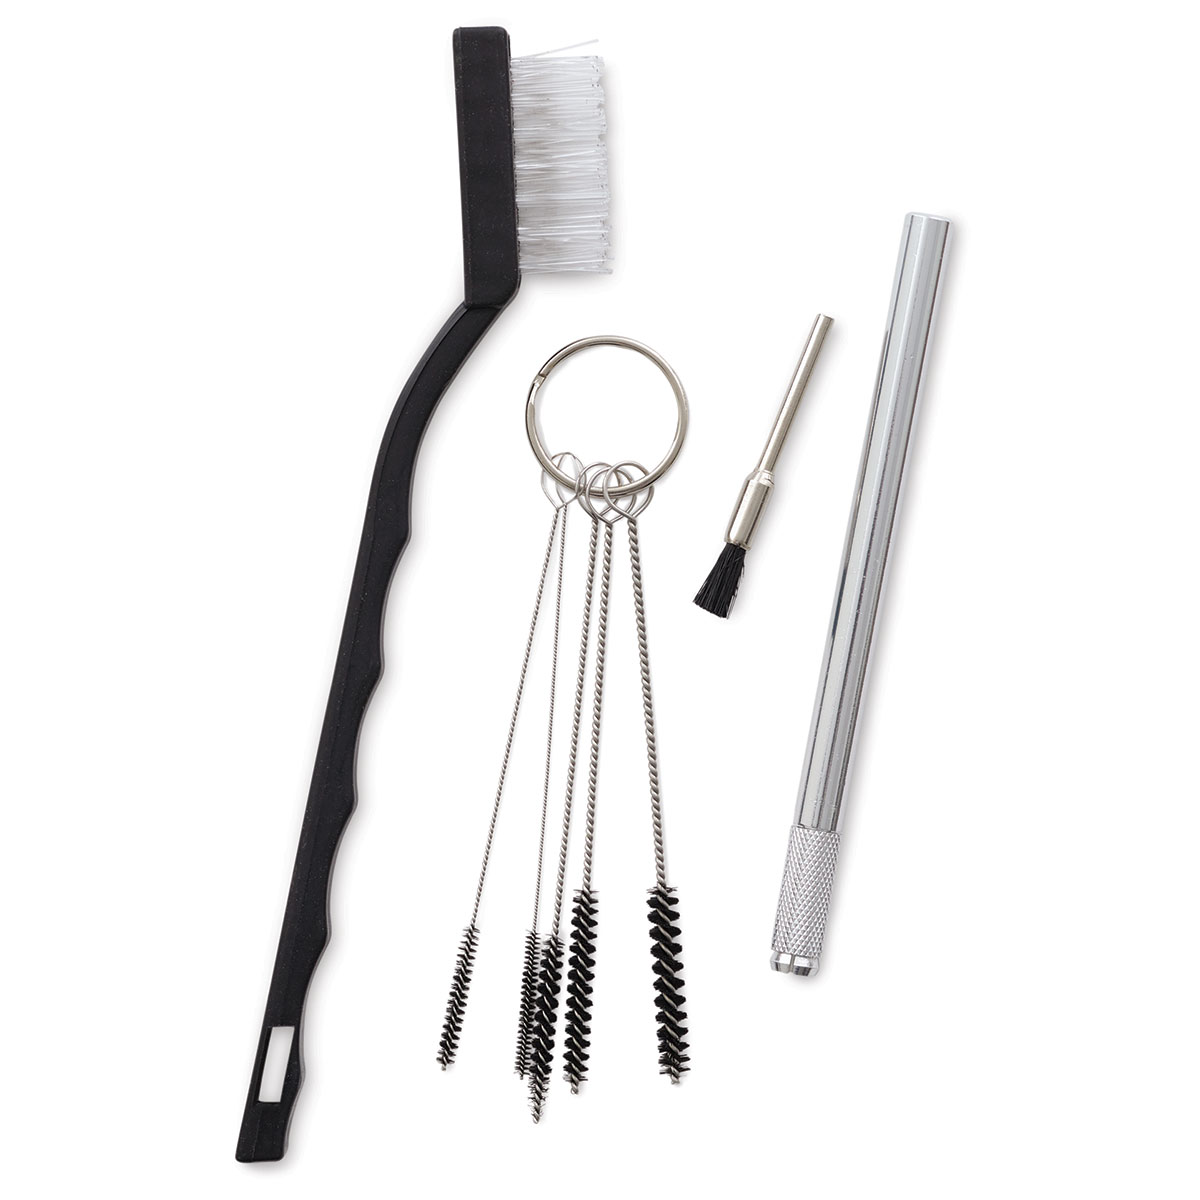 OPHIR Cleaning Tool Set Cleaning Kit with Cleaning Pot,Brush,Needle for  Airbrush